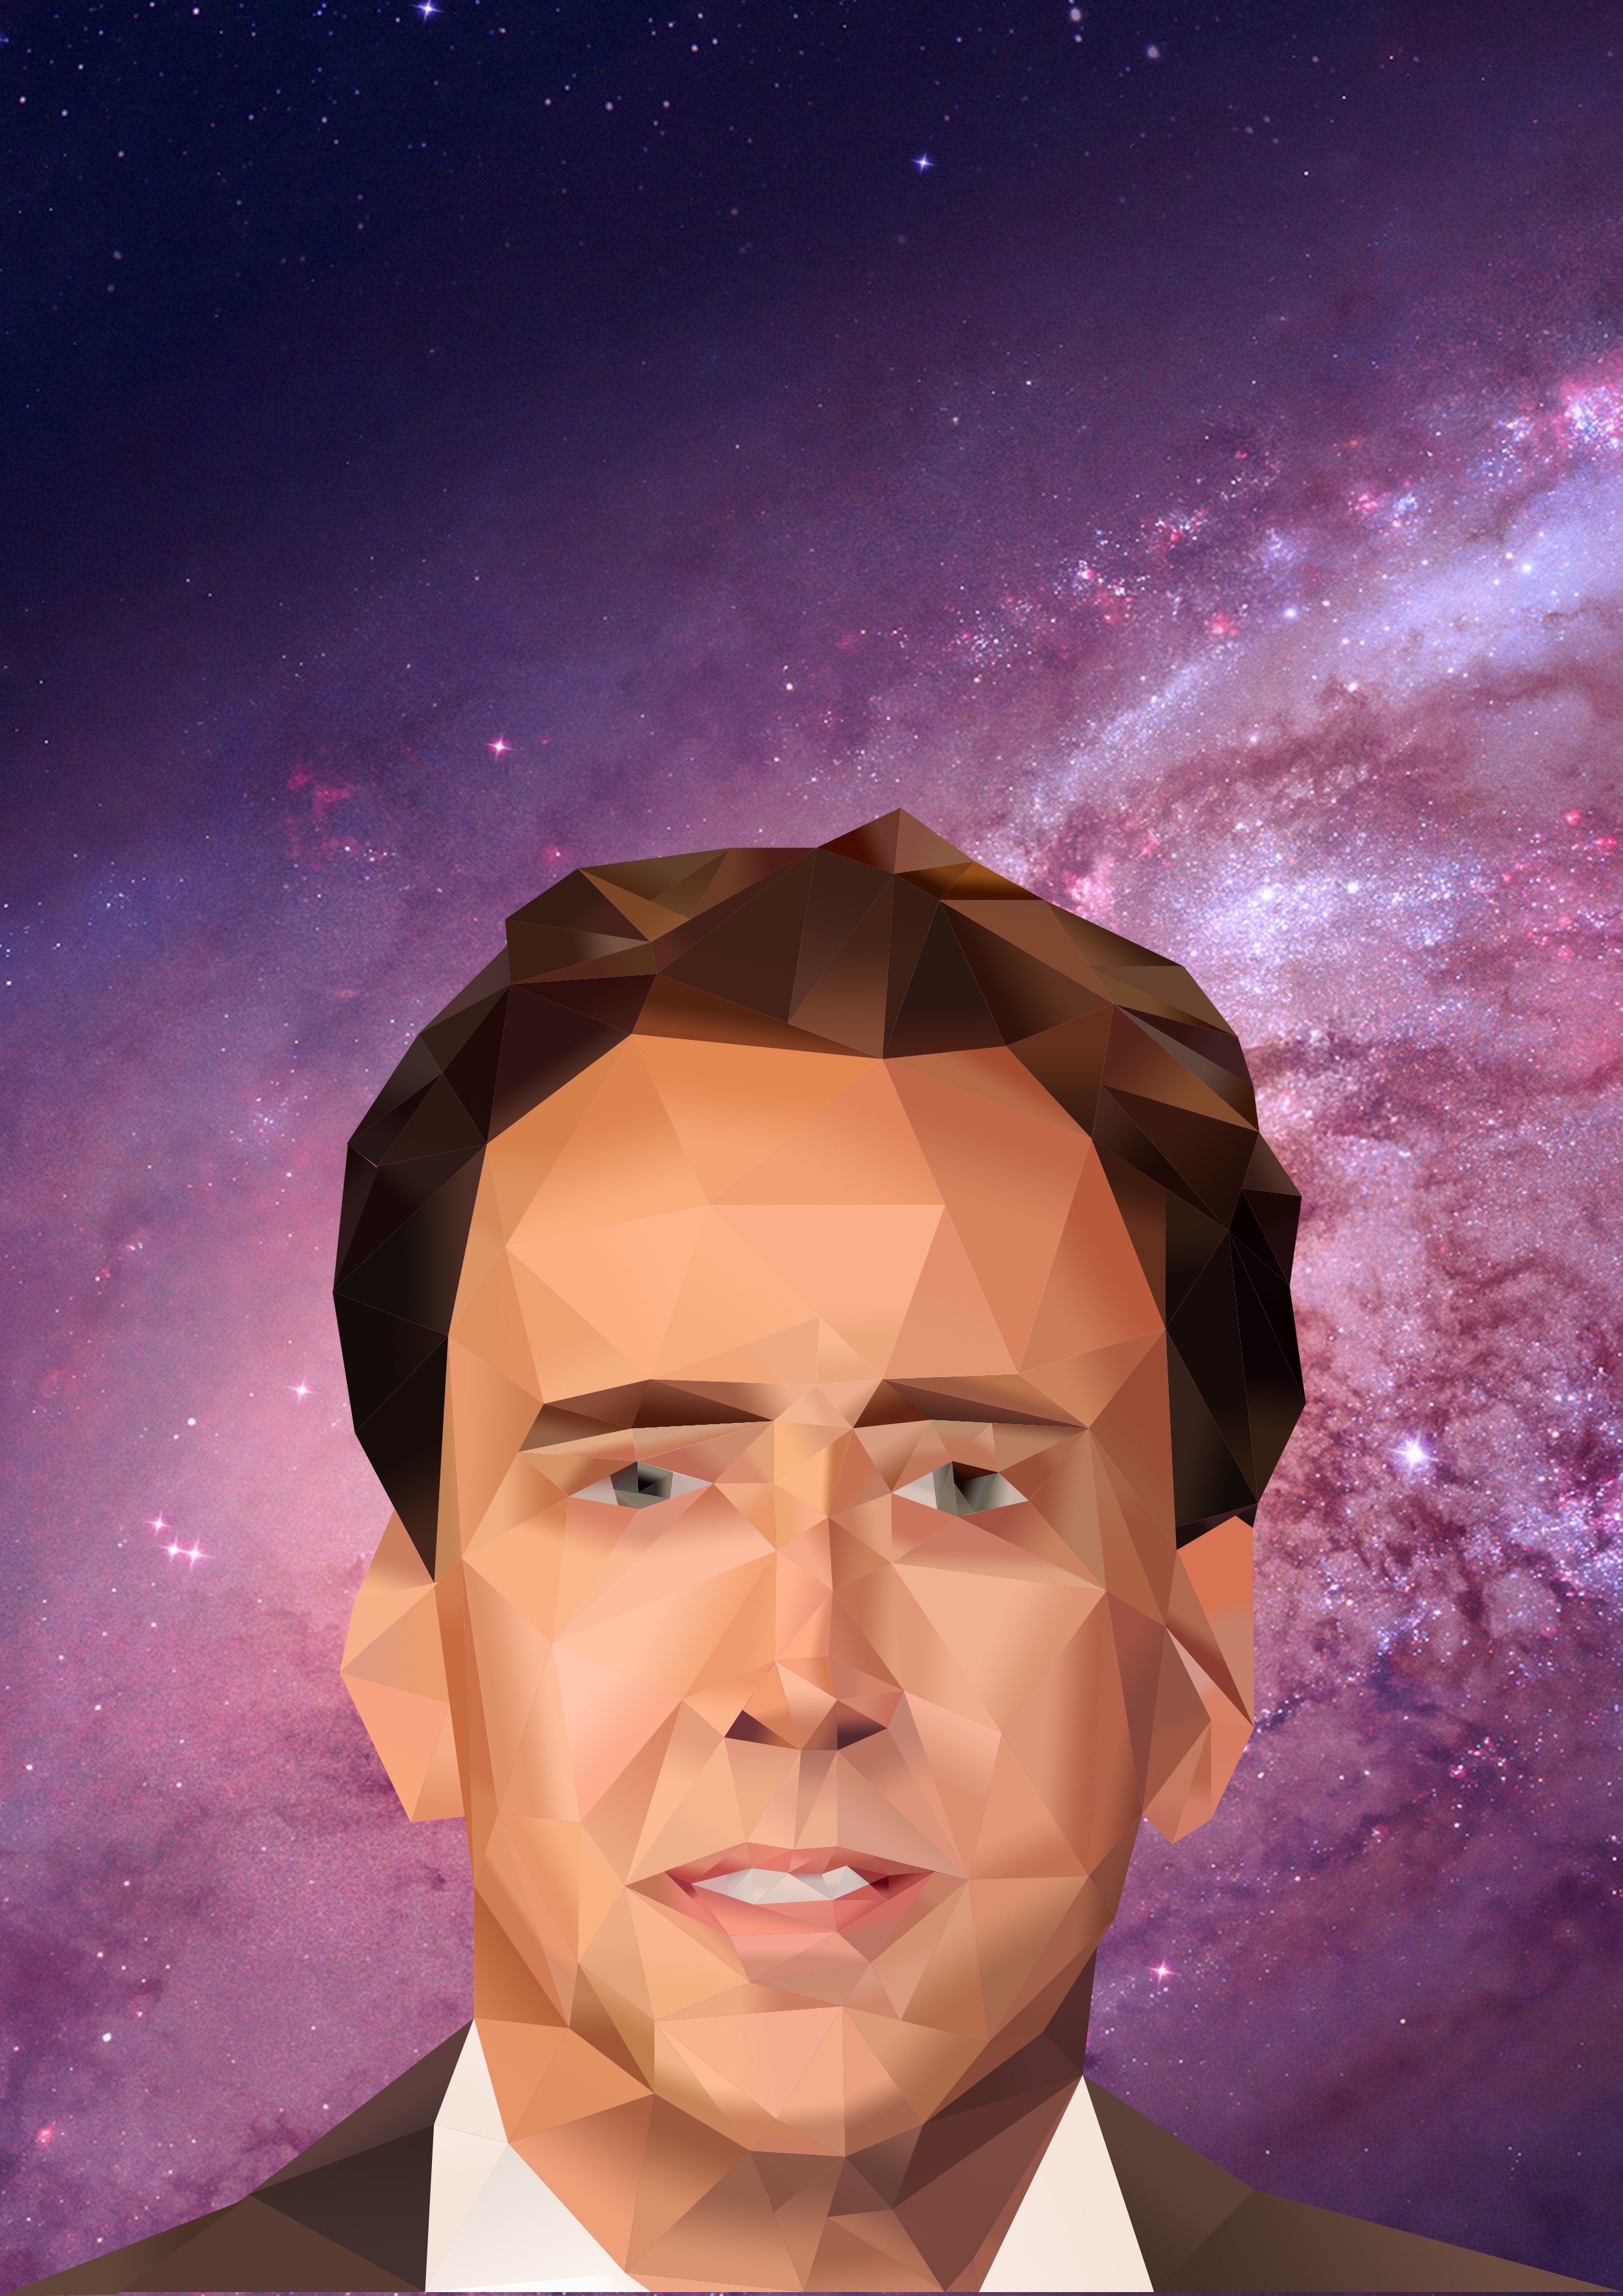 General 2480x3508 Nicolas Cage space men photoshopped face triangle actor